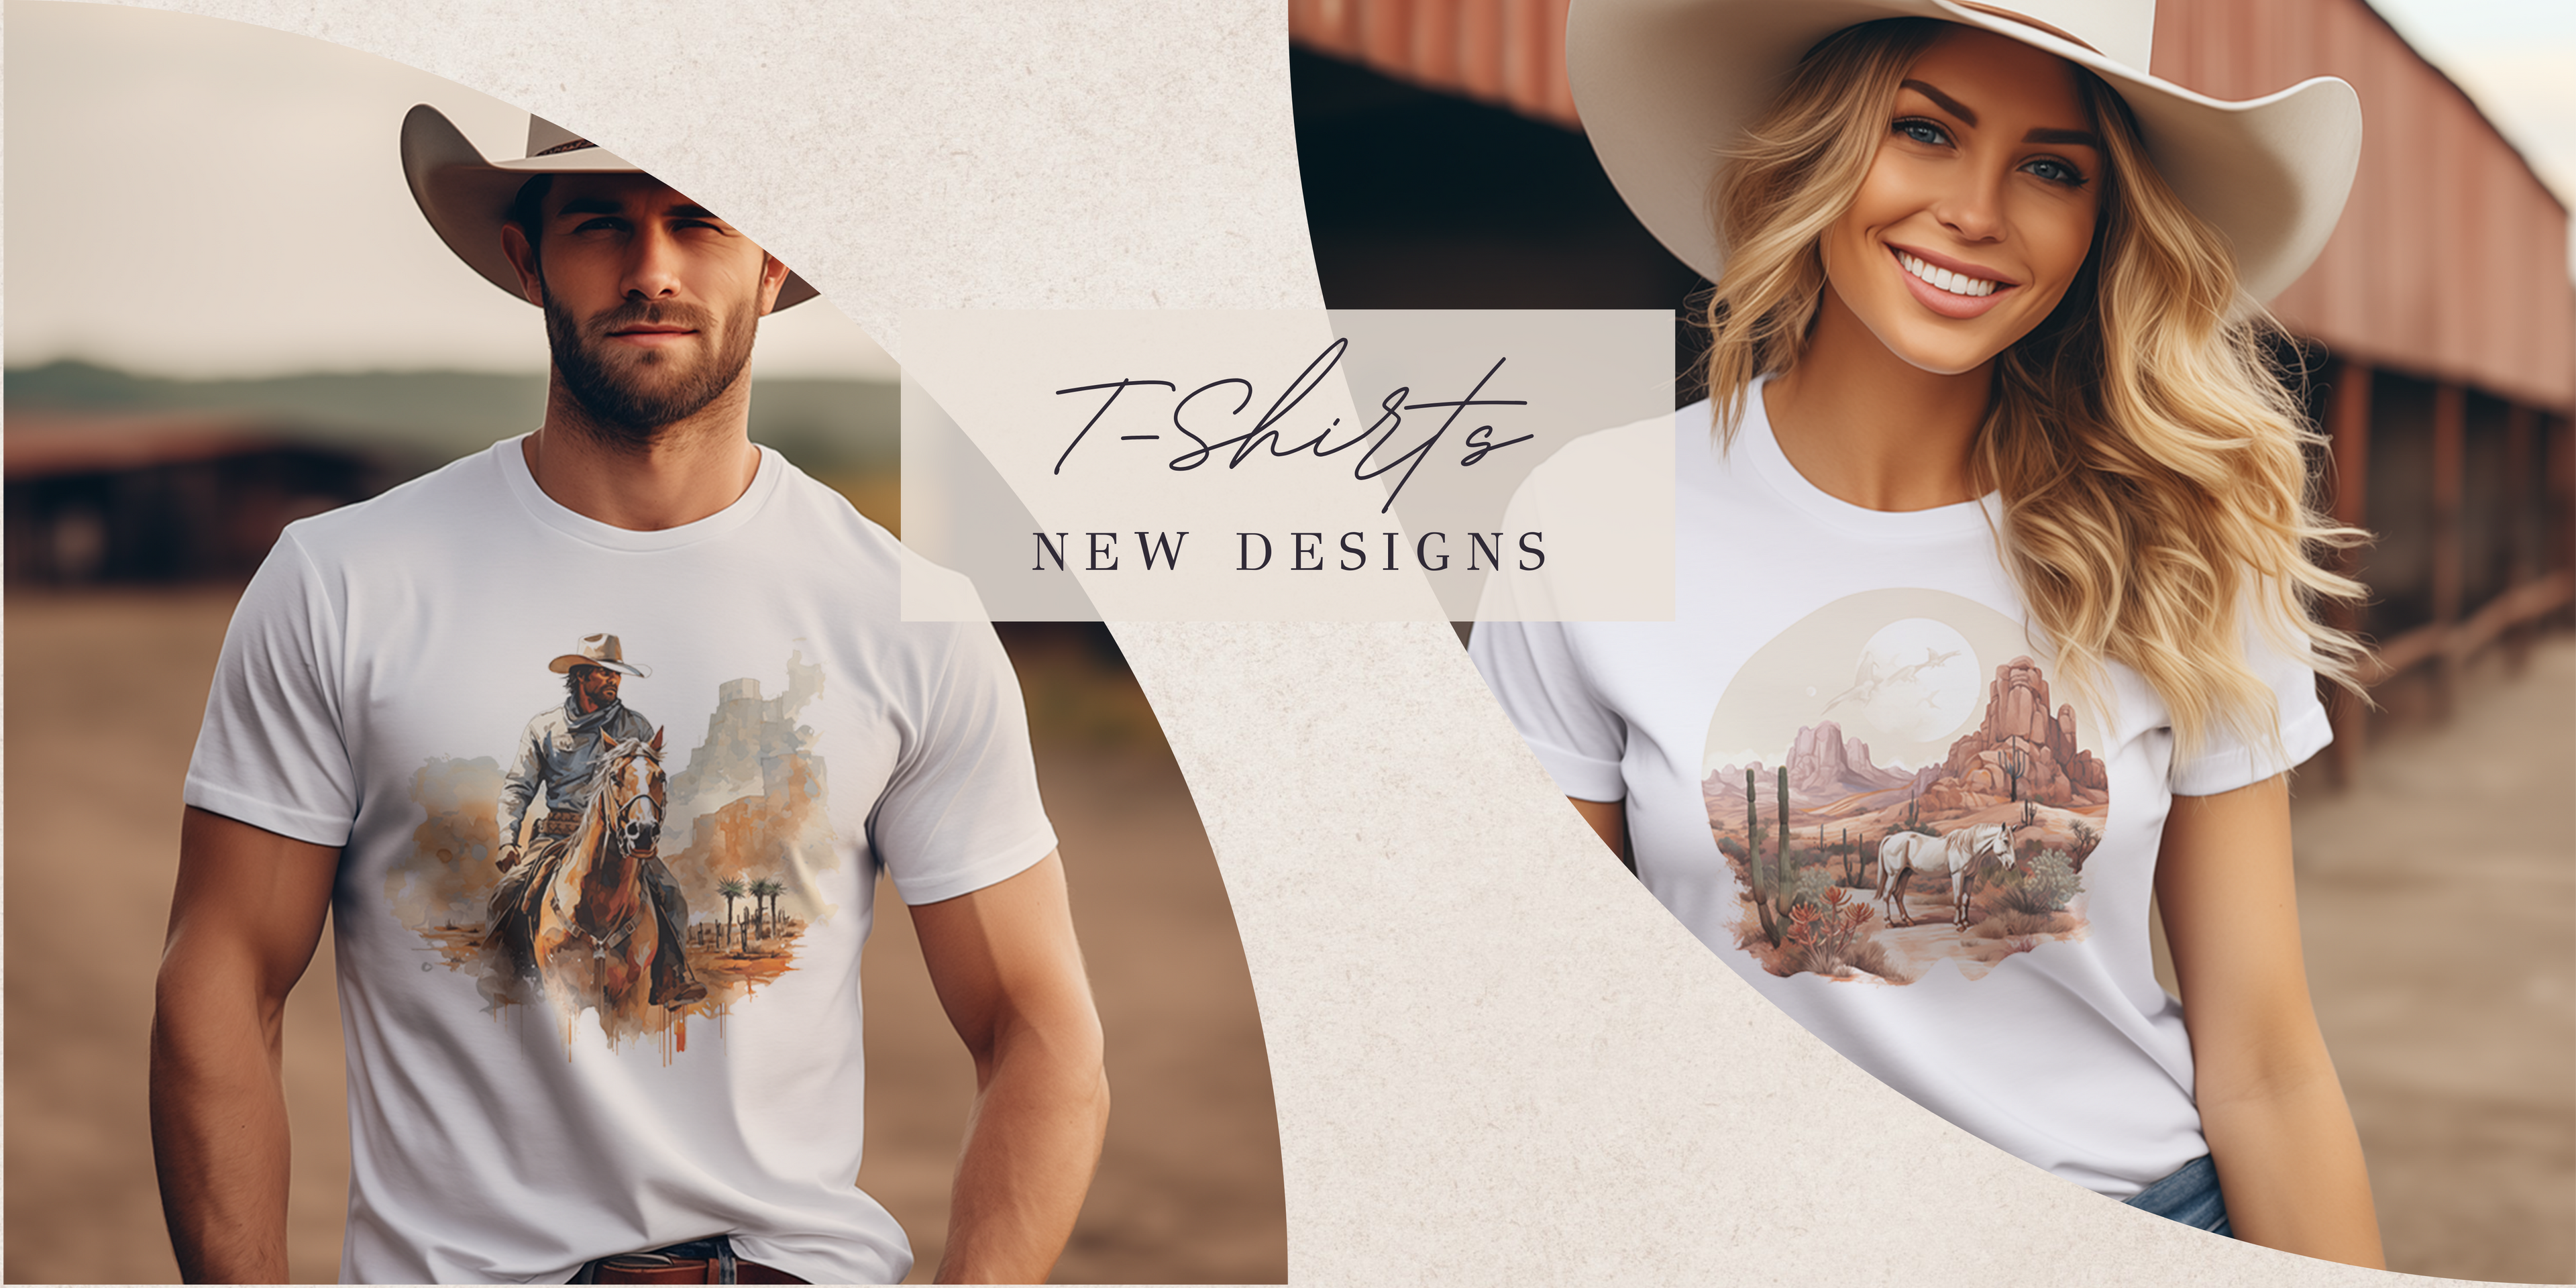 Style in Every Thread: Explore Eliza Singer's Latest T-Shirt Collection - A Fusion of Wild West Charm and Modern Elegance. Elevate Your Western Wardrobe Today! #ElizaSinger #WesternFashion #TShirtCollection 🌵👕